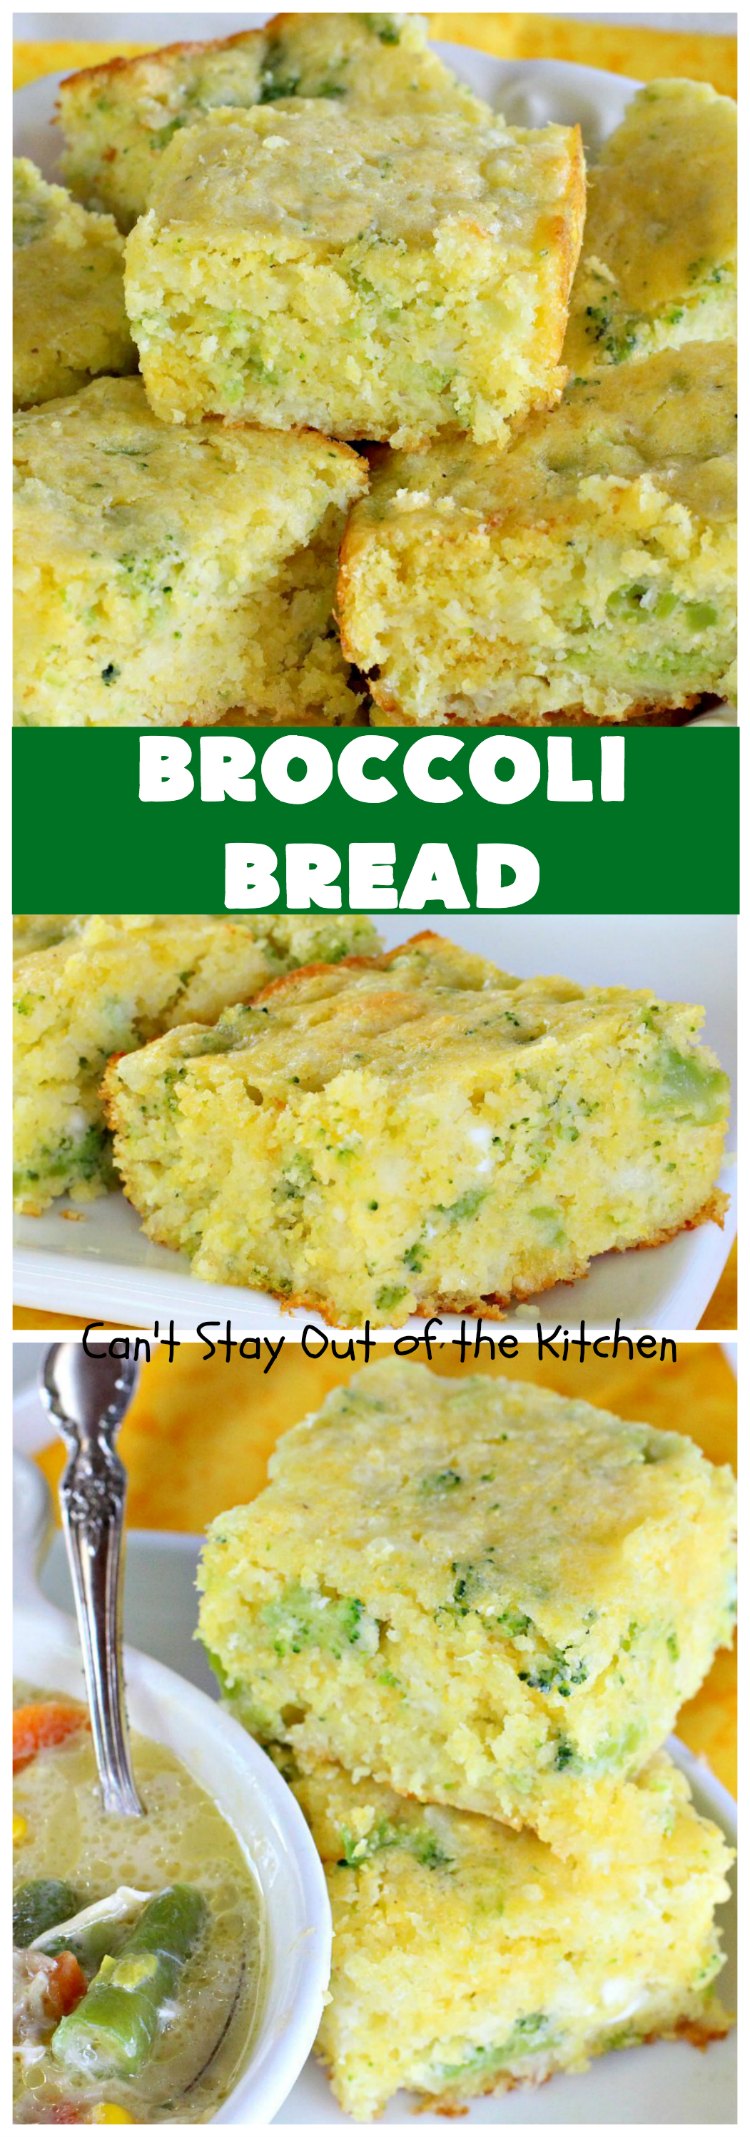 Broccoli Bread | Can't Stay Out of the Kitchen